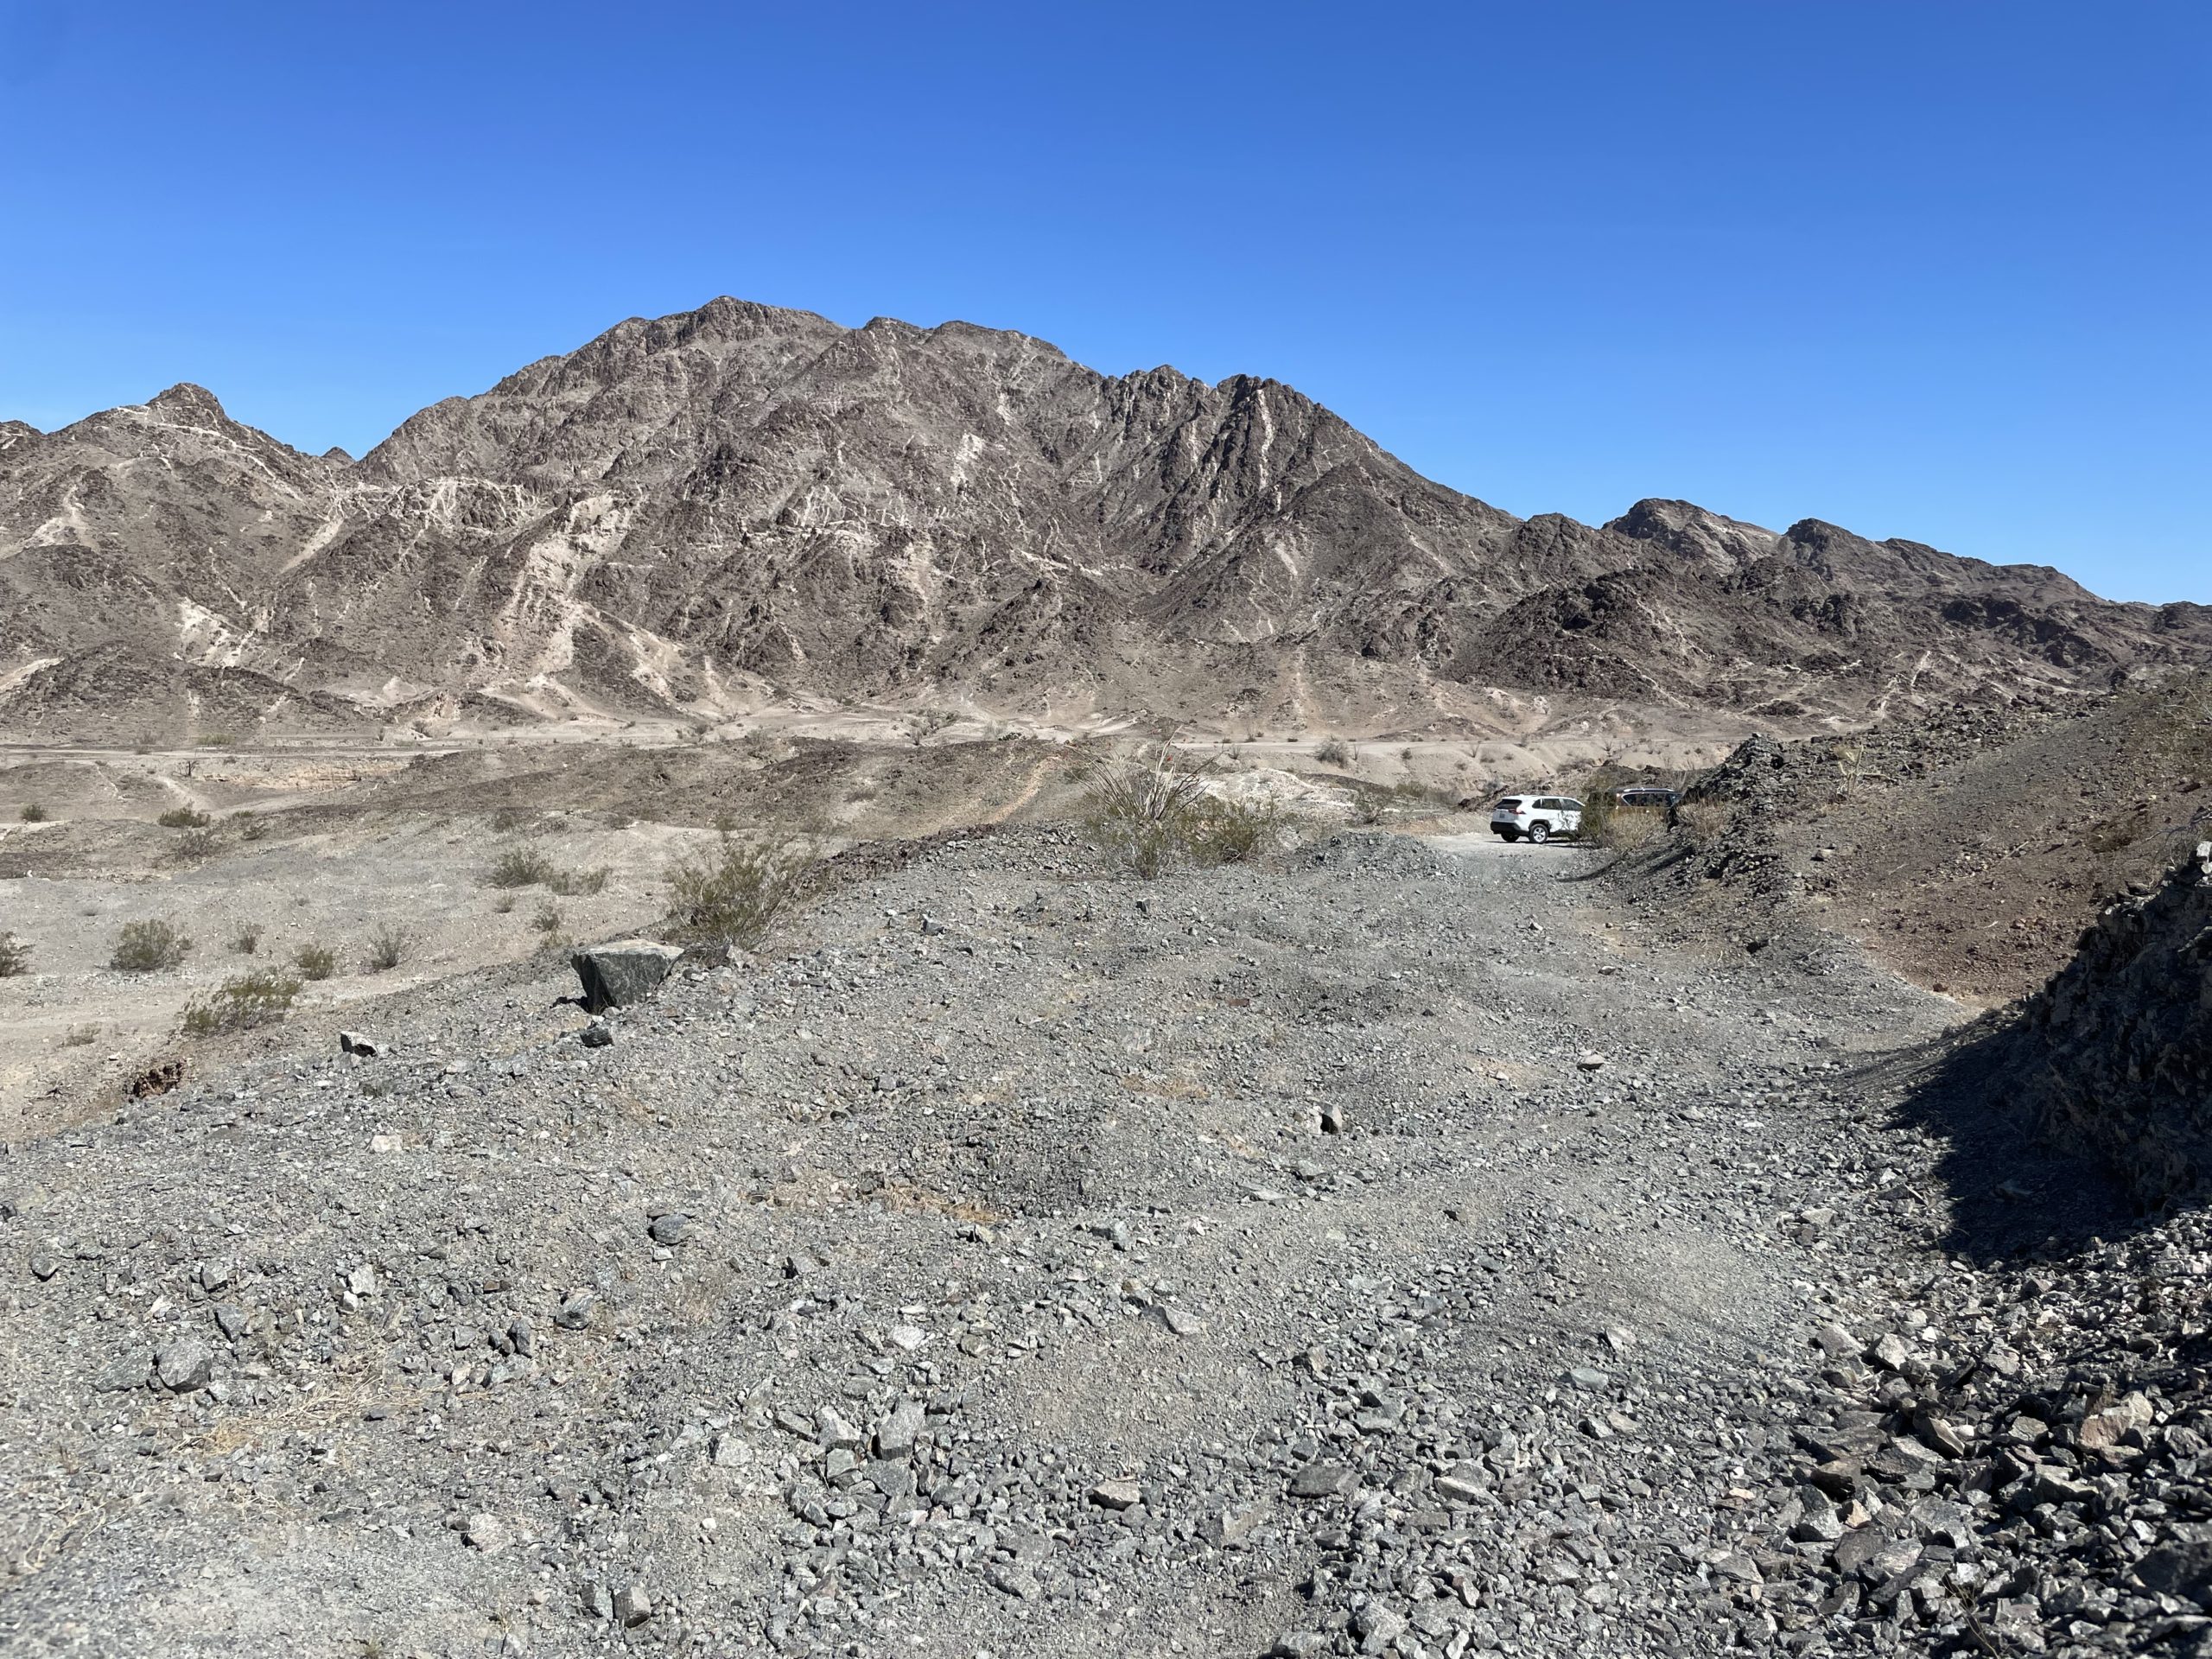 Cargo Muchacho Mountains north of Ameican Boy pit area